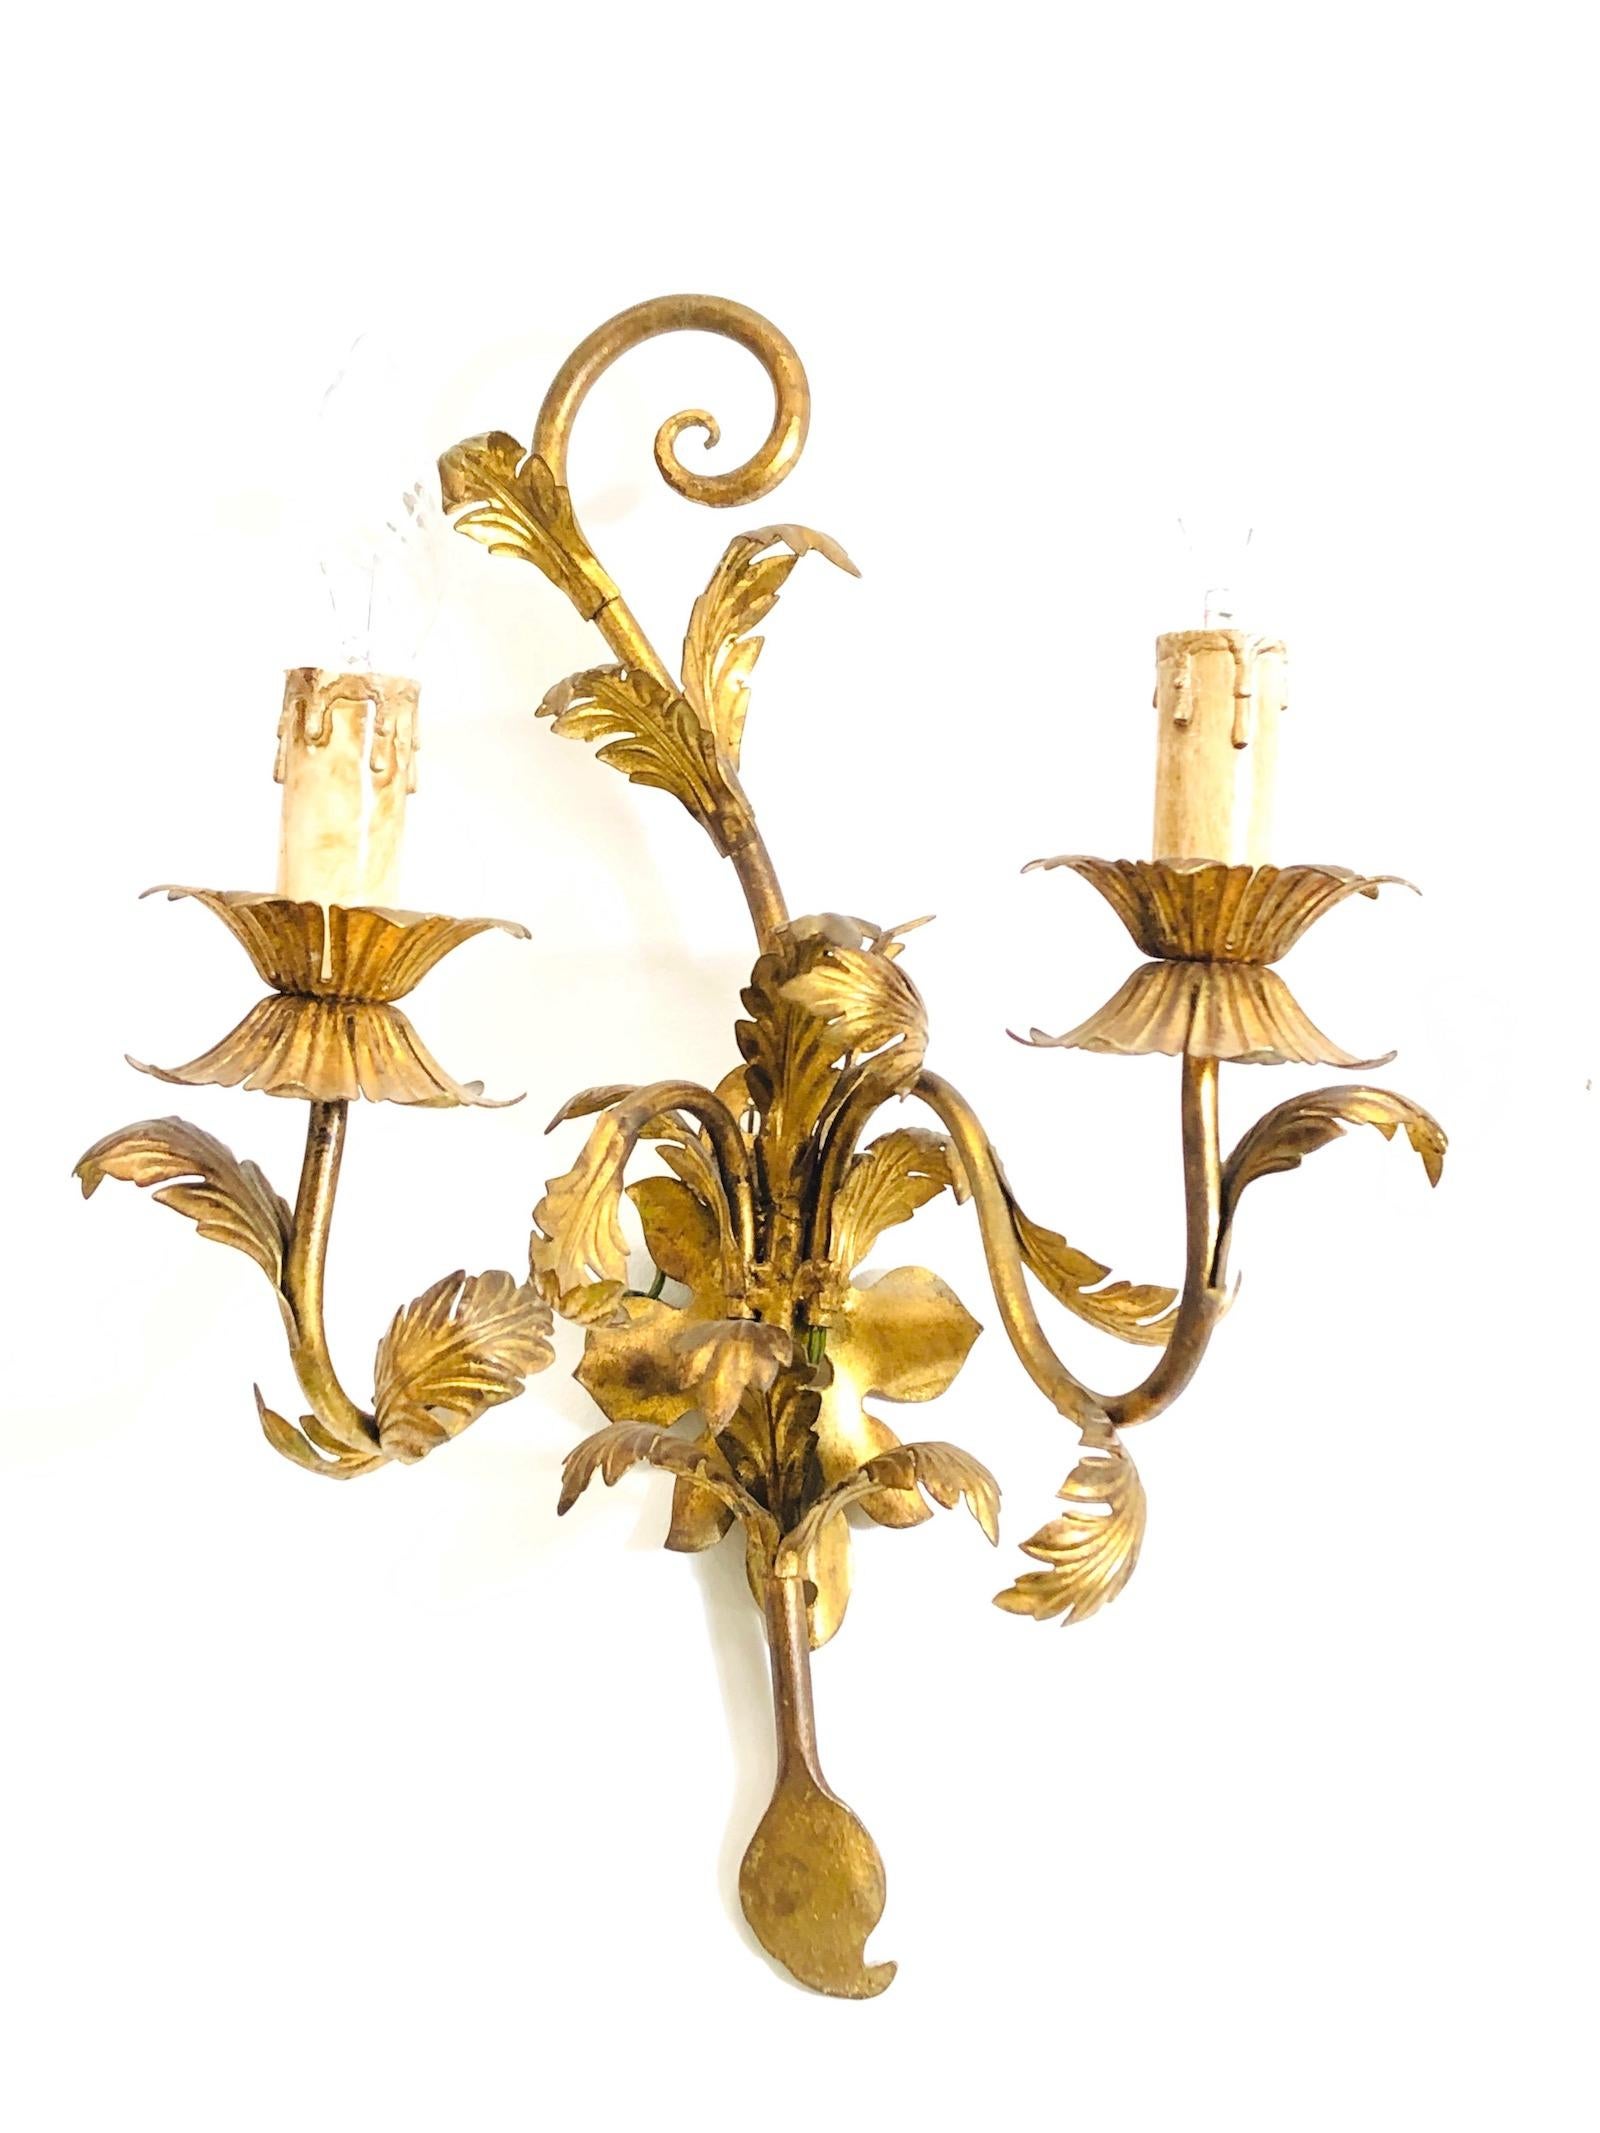 A pair Hollywood Regency midcentury gilt floral tole sconces, each fixture requires two European E14 candelabra bulbs, each bulb up to 40 watts. The wall lights have a beautiful patina and give each room a eclectic statement. Made by Koegel Leuchten